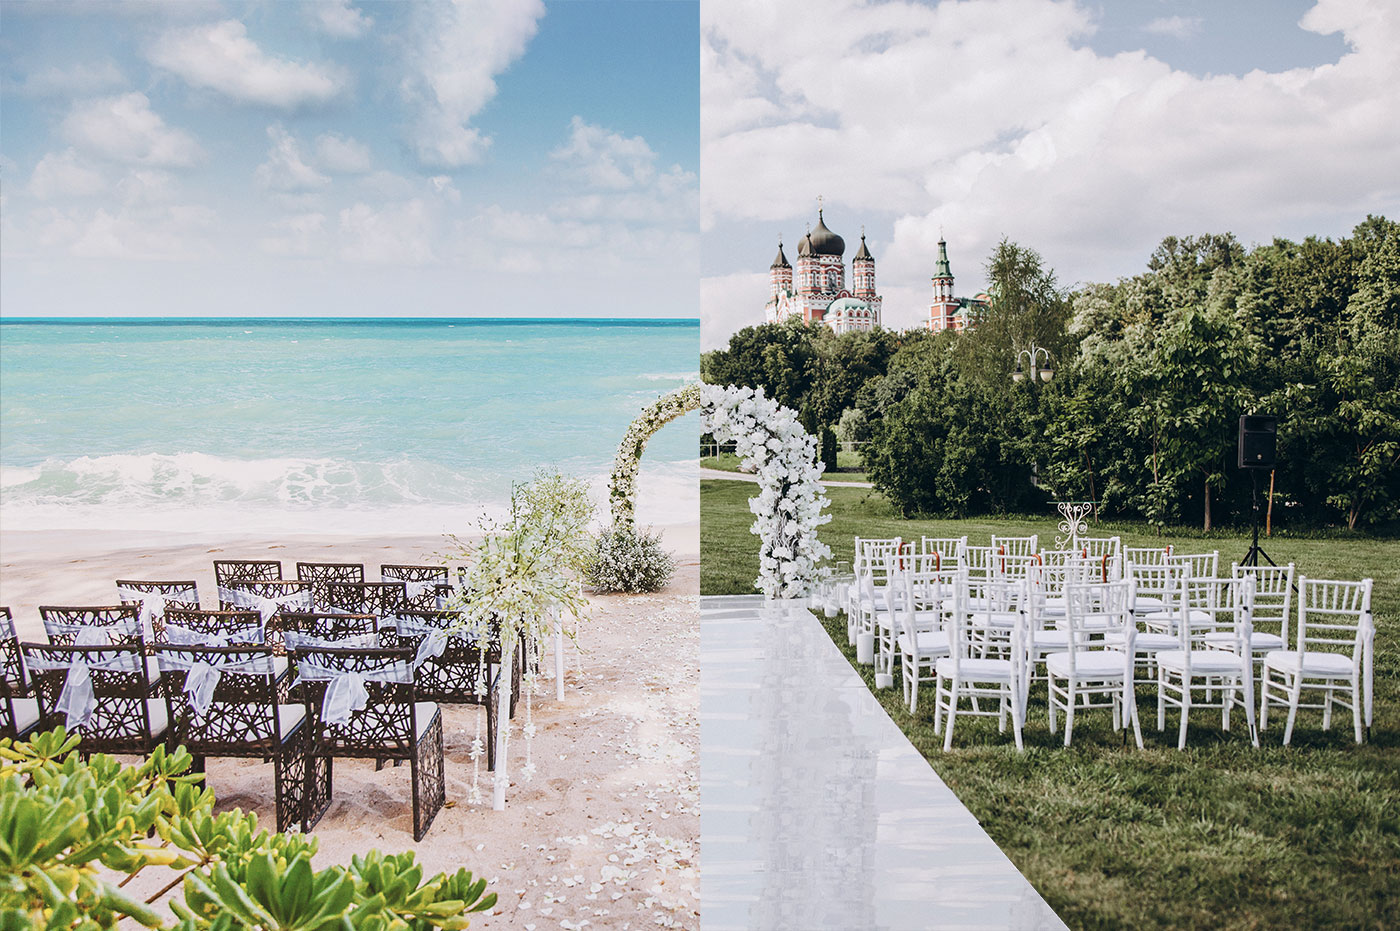 How to Compare Wedding Venues